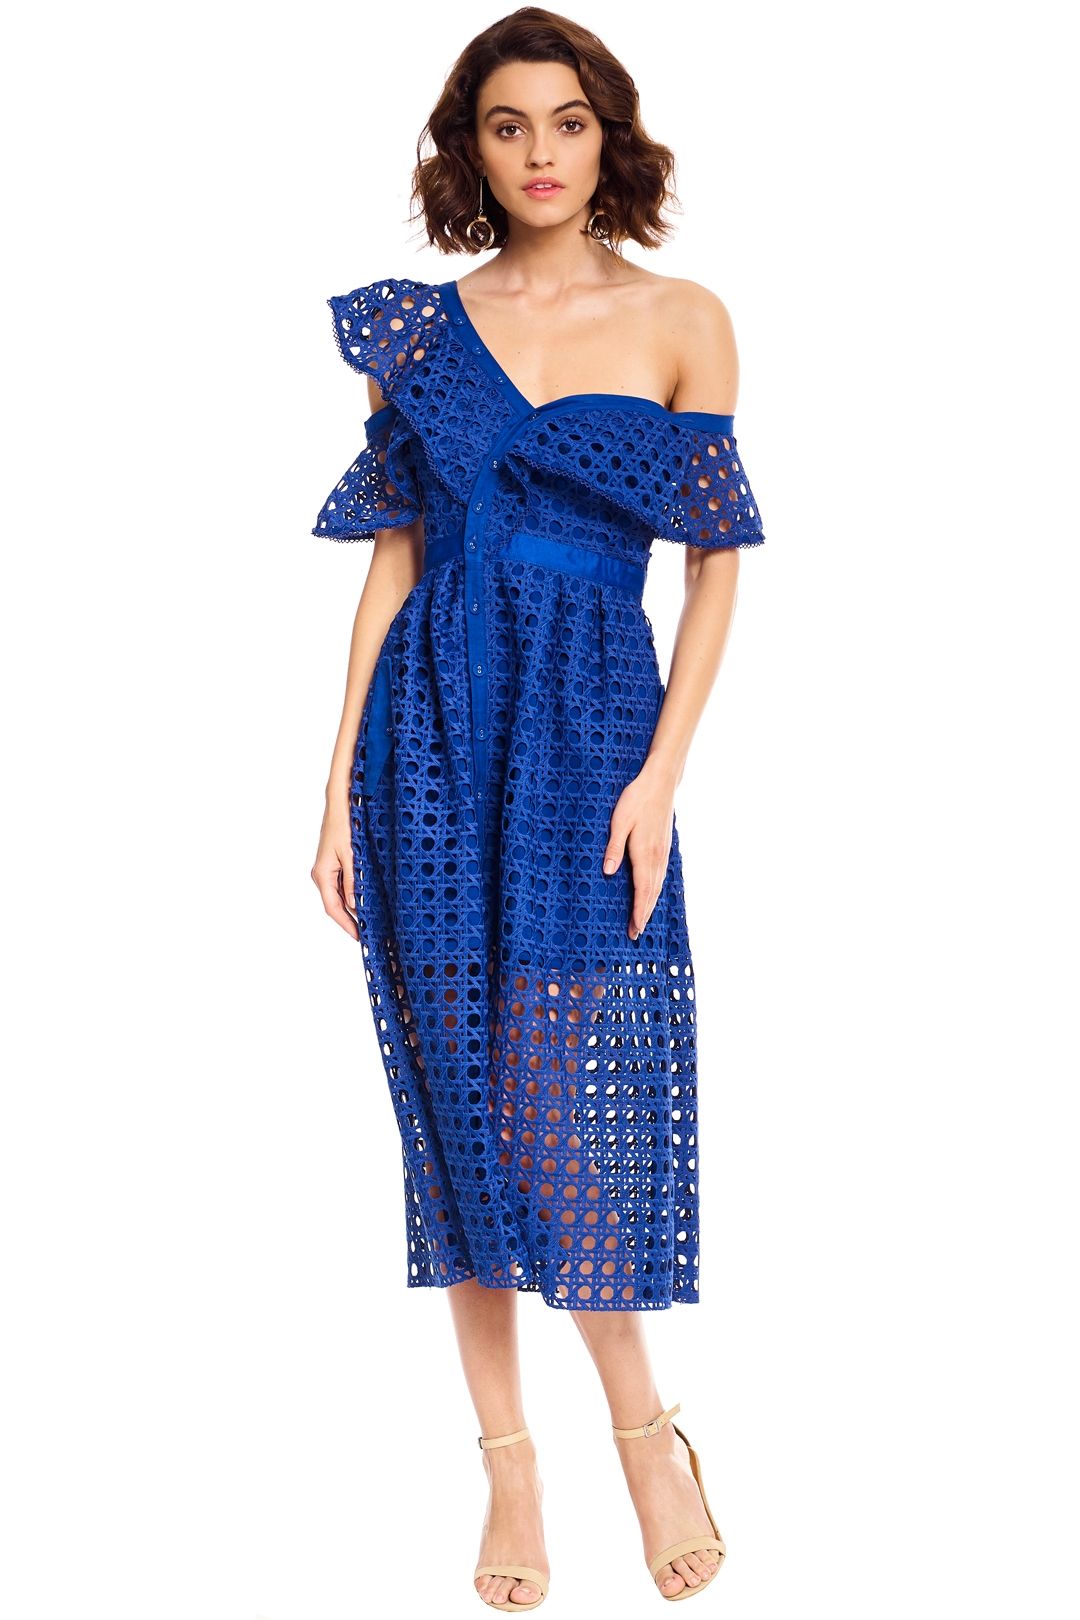 Guipure Frill Dress in Cobalt Blue by Self Portrait for Rent